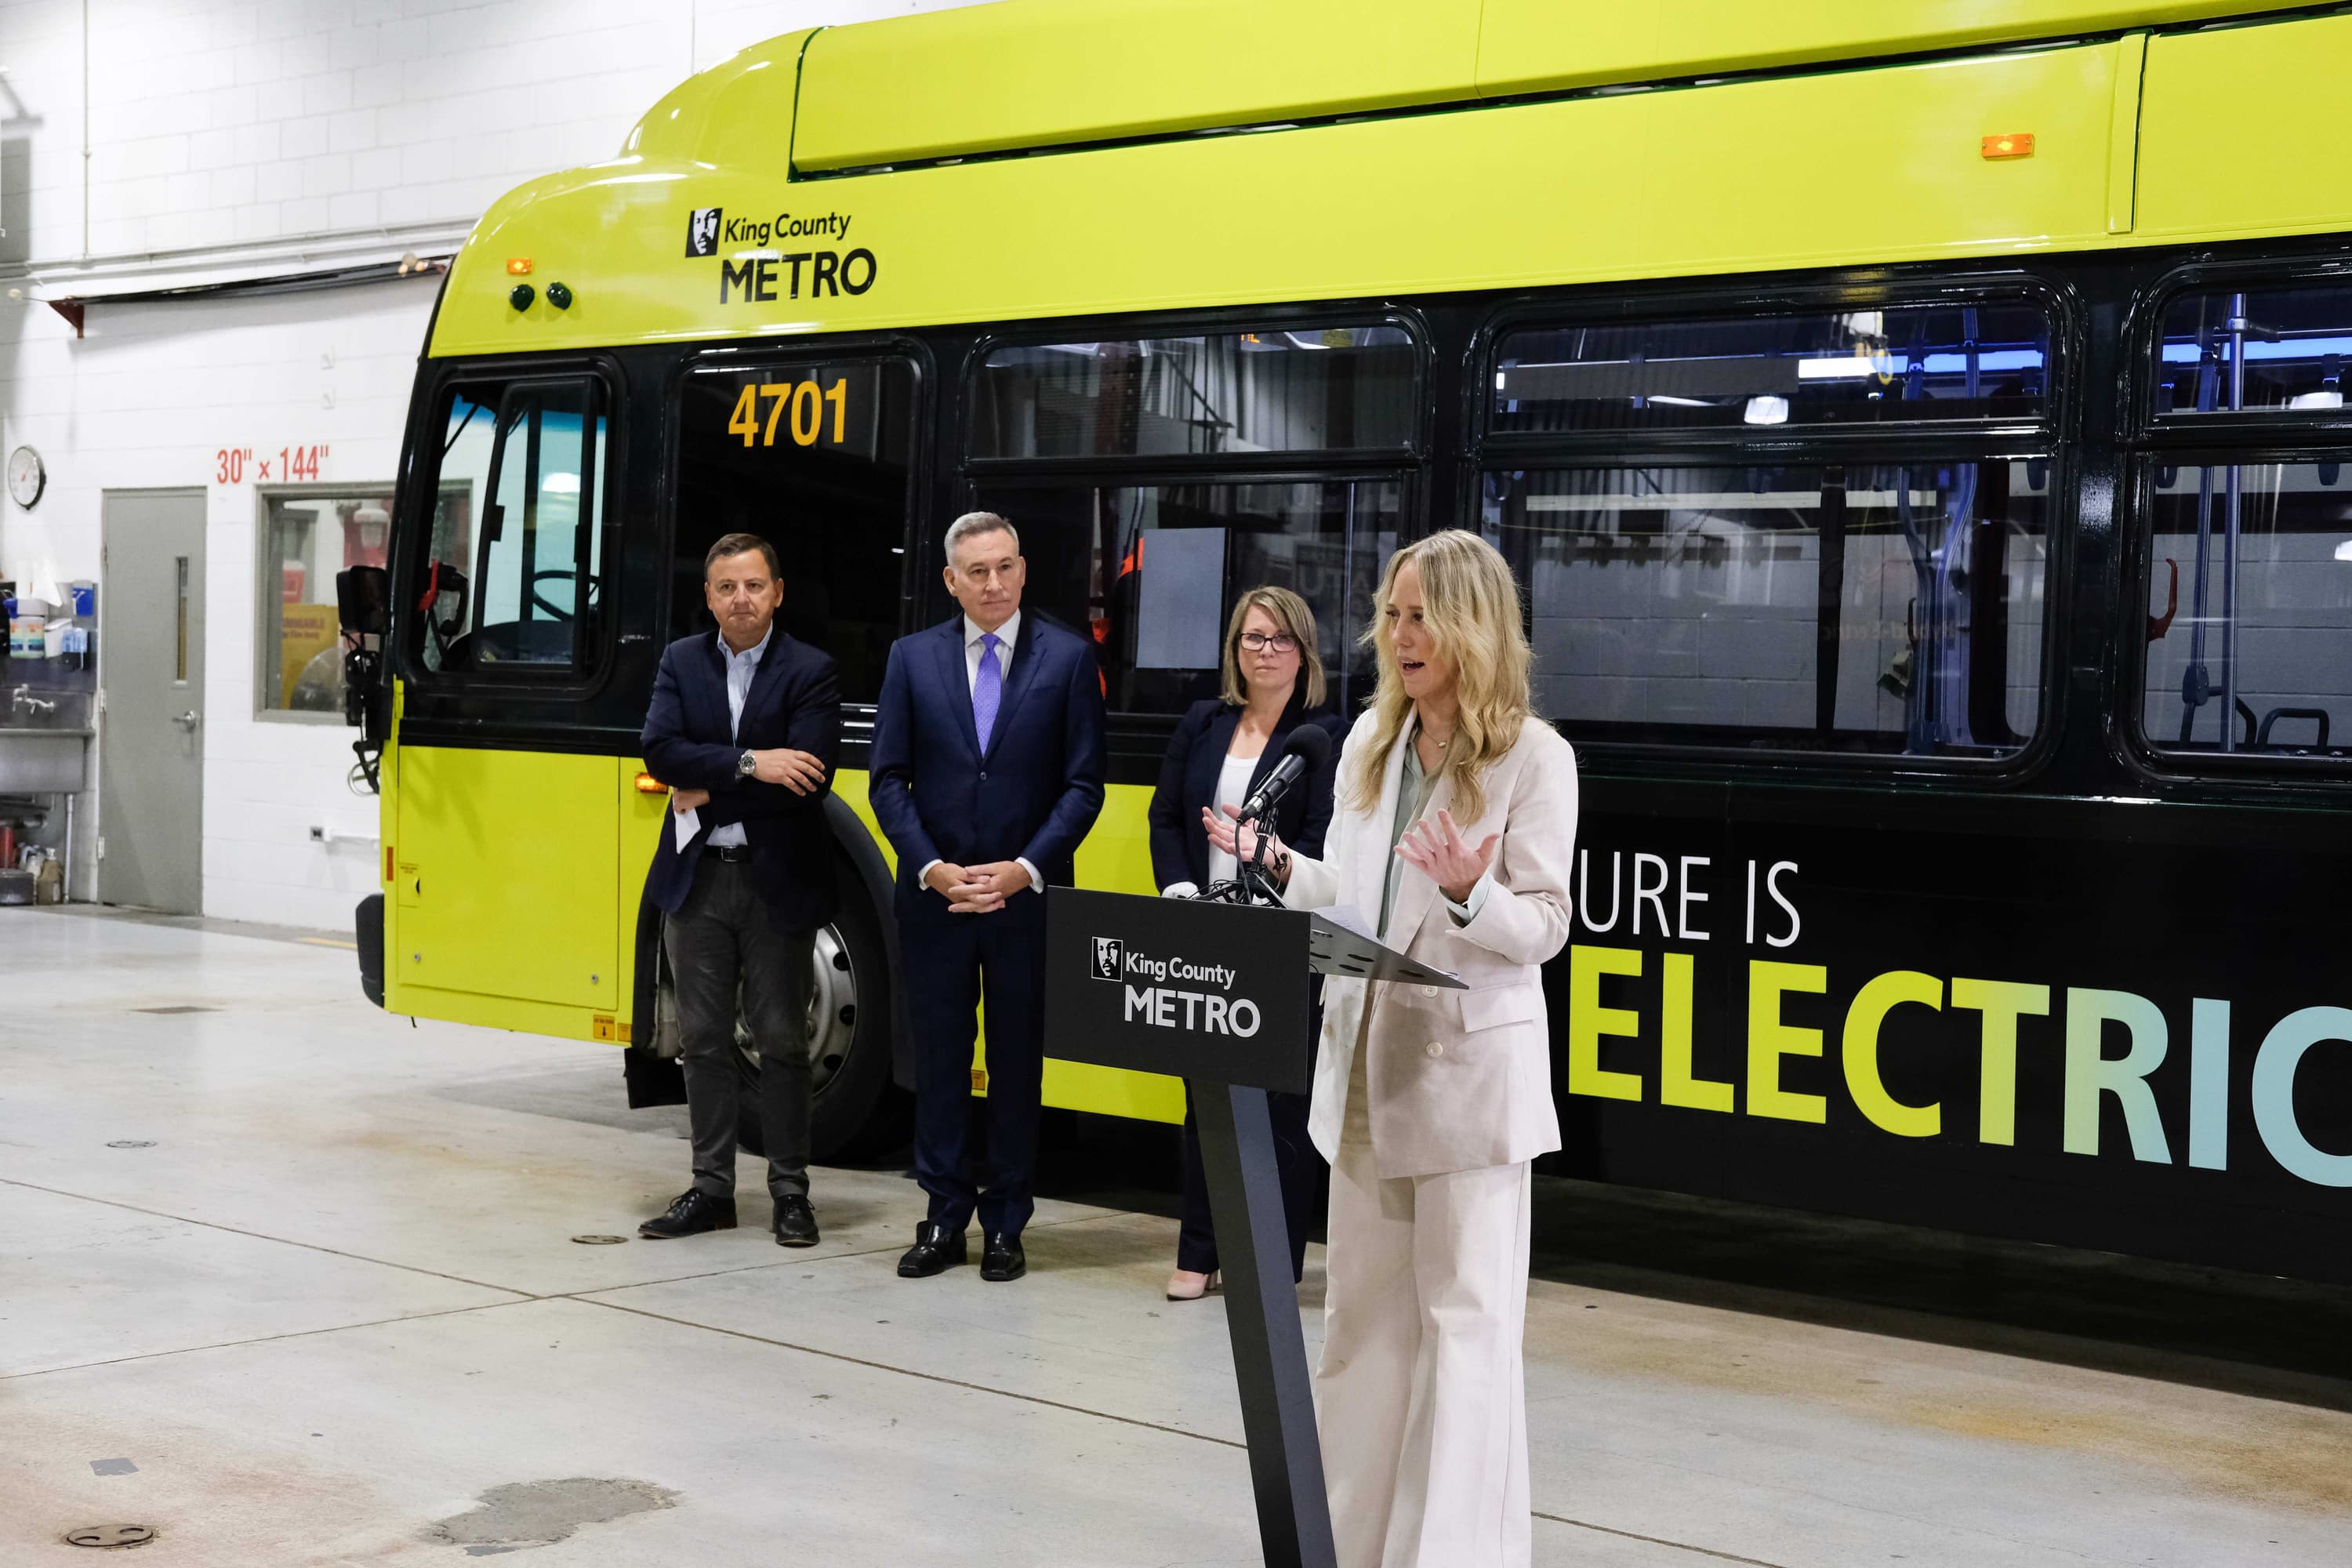 Katie Ryan, livery design manager from Teague, speaks at a press conference with Dow Constantine about the new designs for the King County Metro bus, which is behind her.